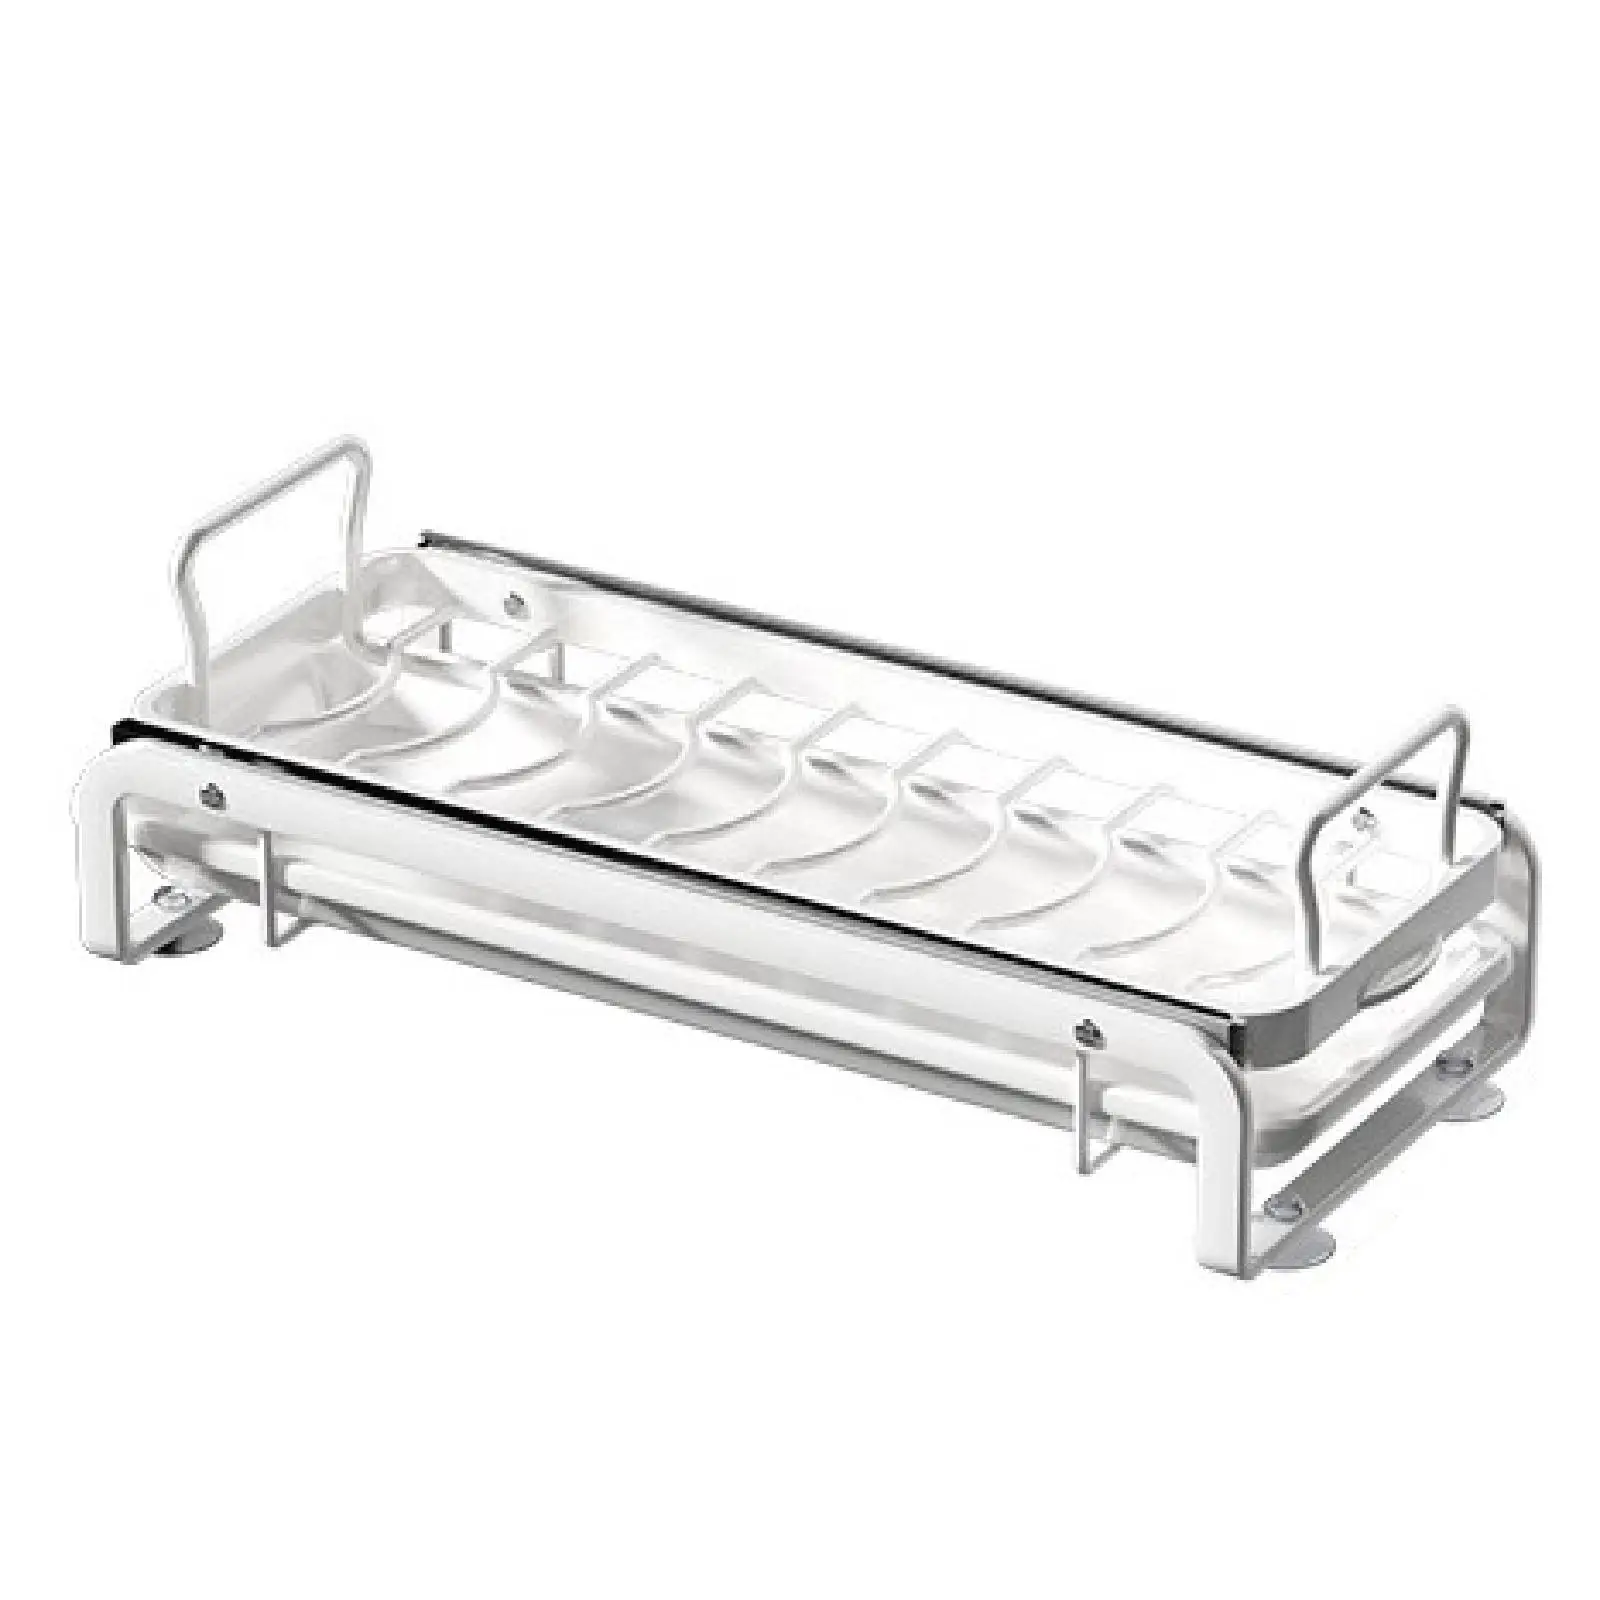 Slide Out Dish Drying Rack Space Saving Dish Drainer Rack with Drain Tray for Cupboard Cabinet Counter Countertop Kitchen